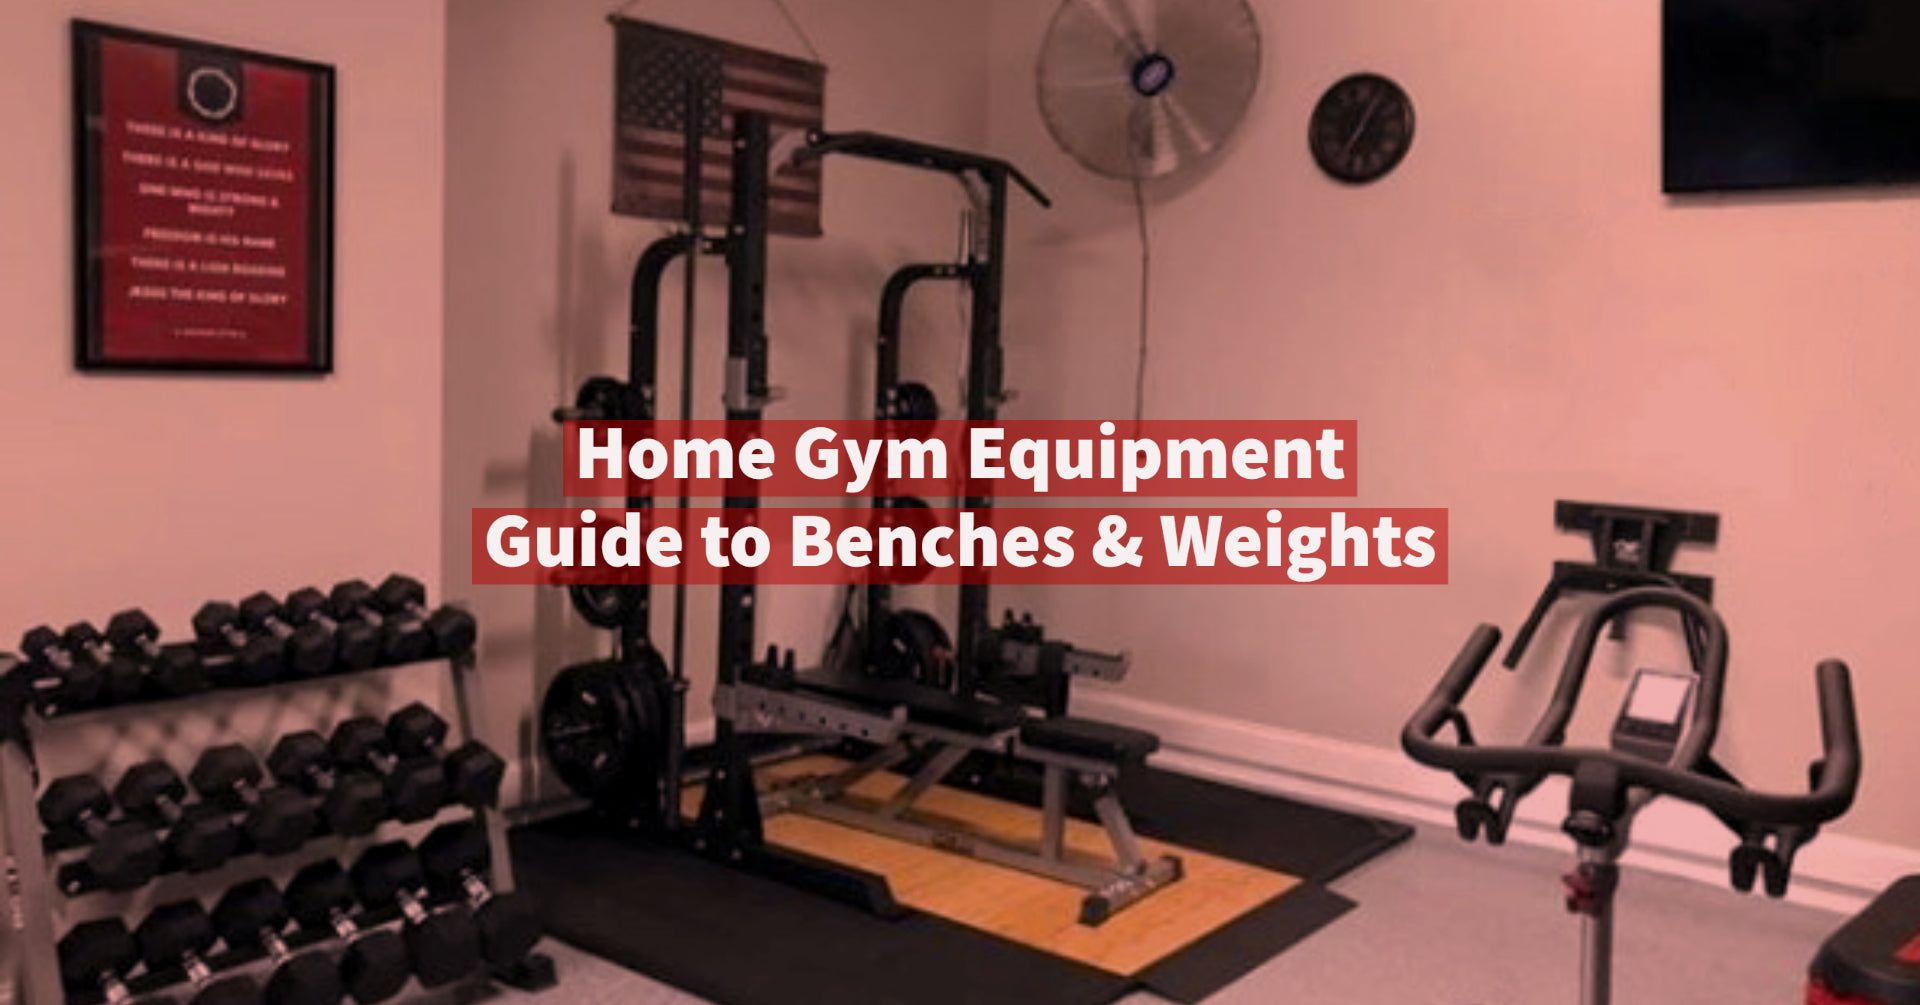 Pink Gym Equipment for Home Workout and Exercise